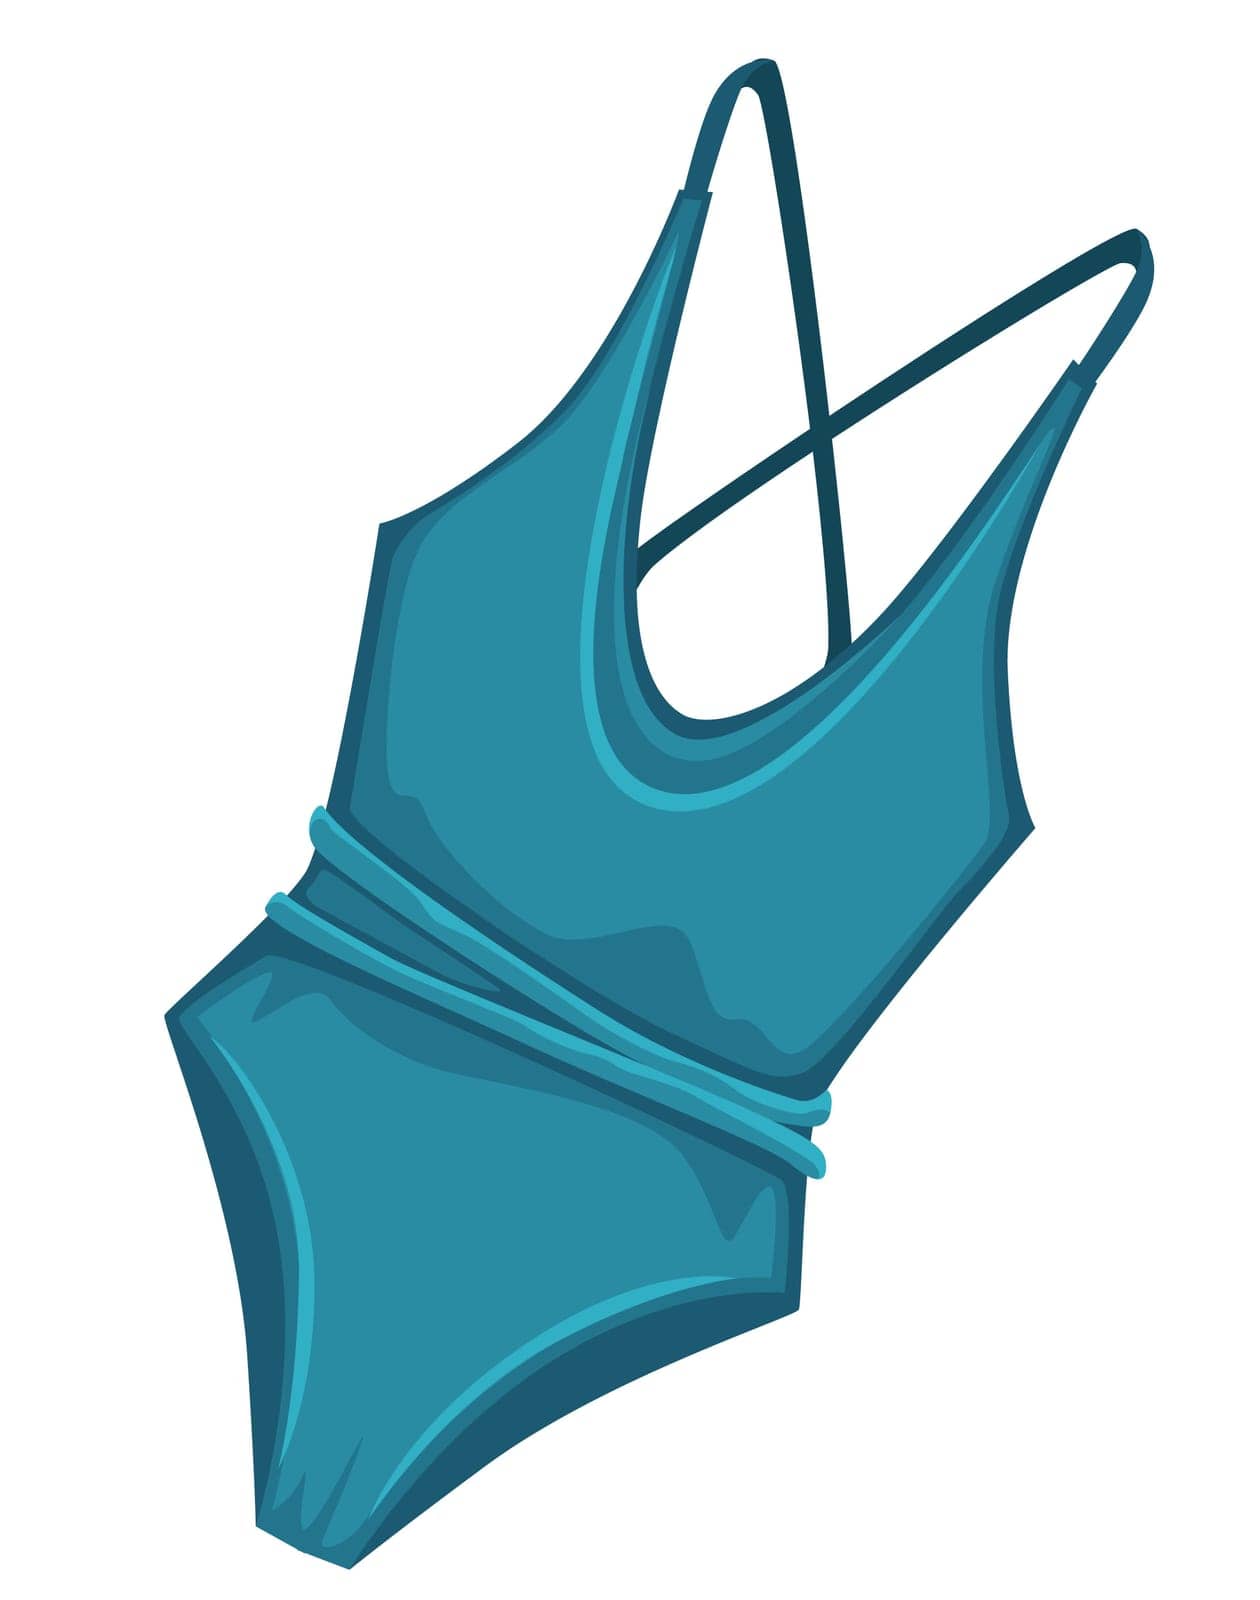 Fashionable clothes for summer vacation and relax by beach. Isolated icon of bathing suit, one piece swimsuit for elegant ladies. Stylish summertime underwear for bathing, vector in flat style